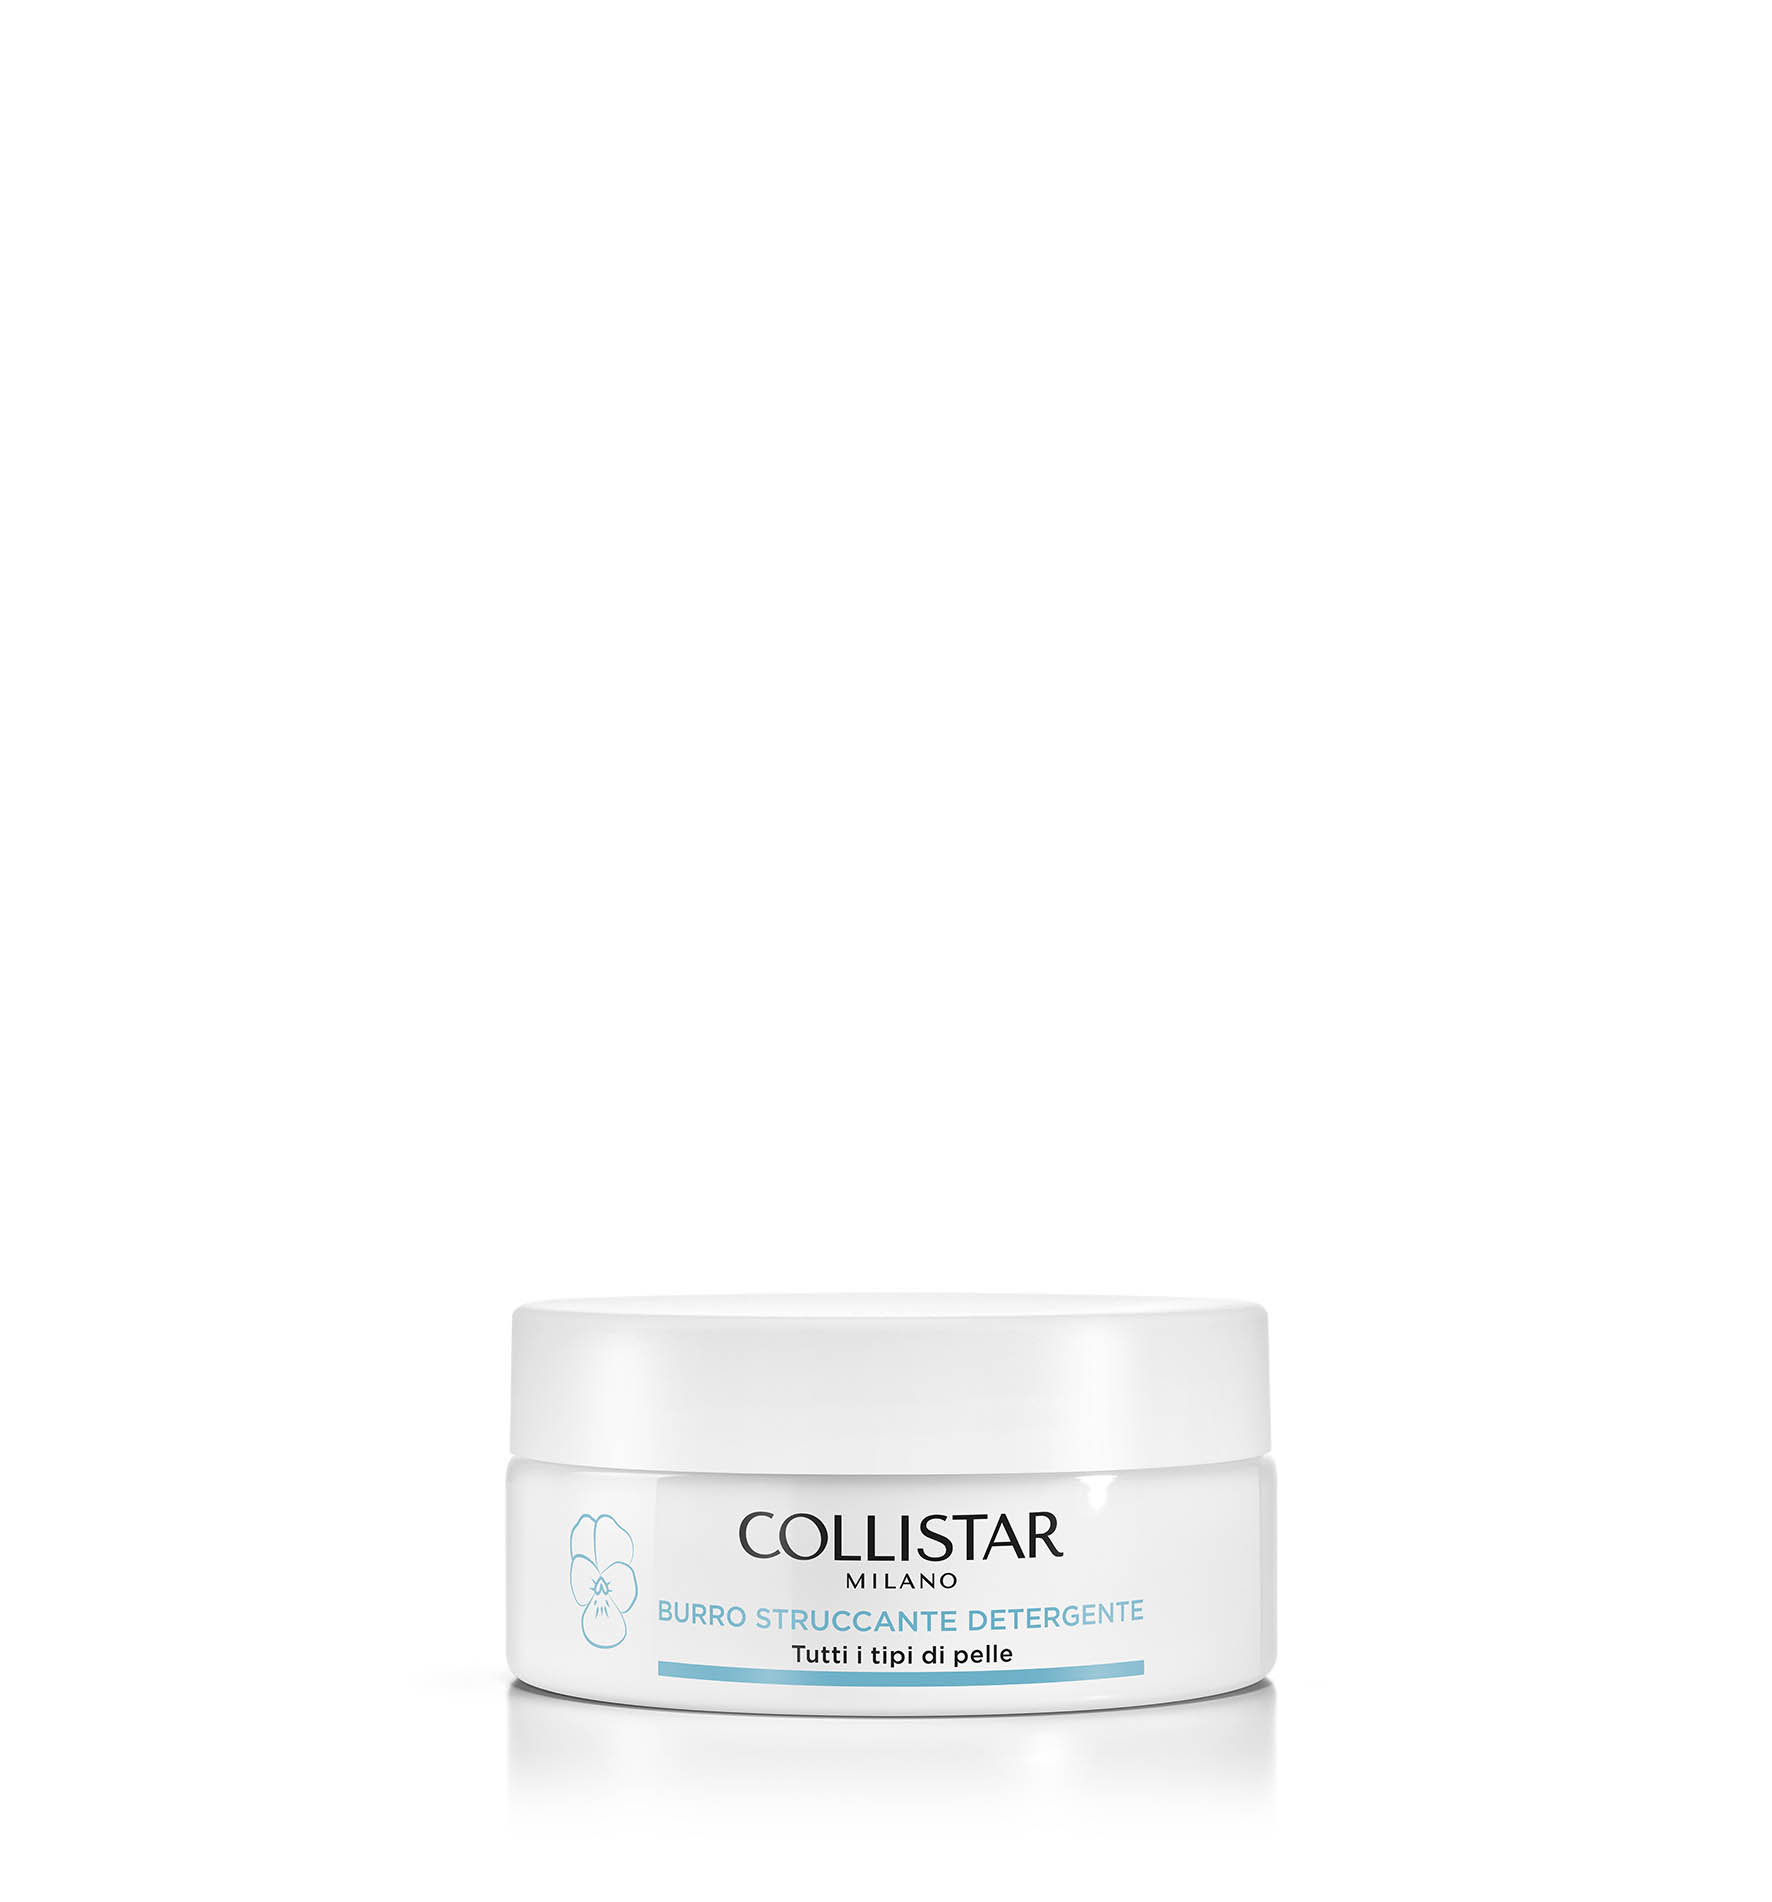 MAKE-UP REMOVING CLEANSING BALM - Face | Collistar - Shop Online Ufficiale